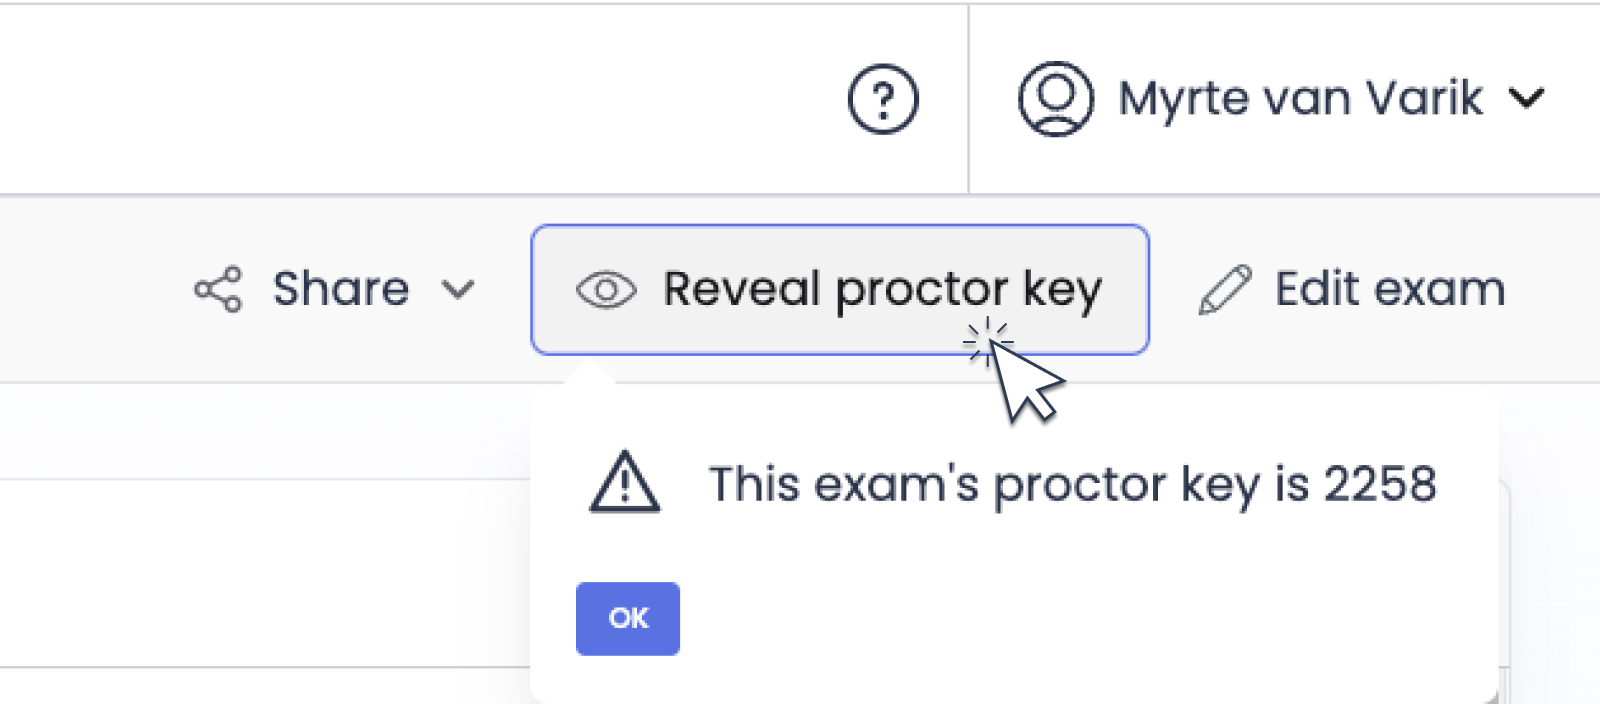 Reveal_proctor_key.png